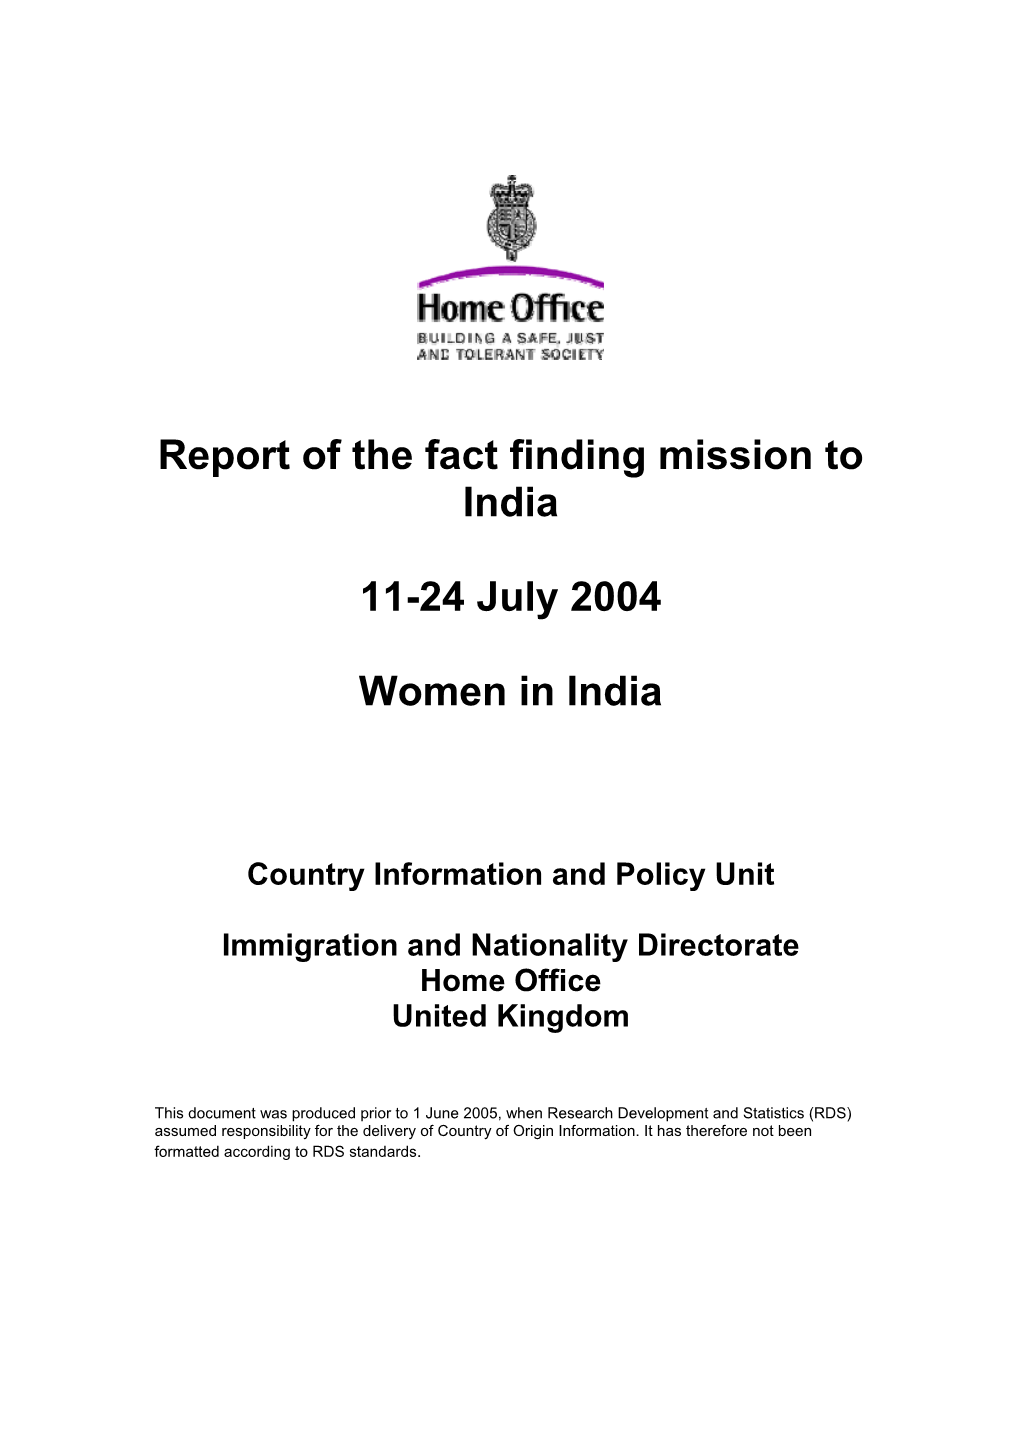 Report of the Fact Finding Mission to India 11-24 July 2004 Women in India